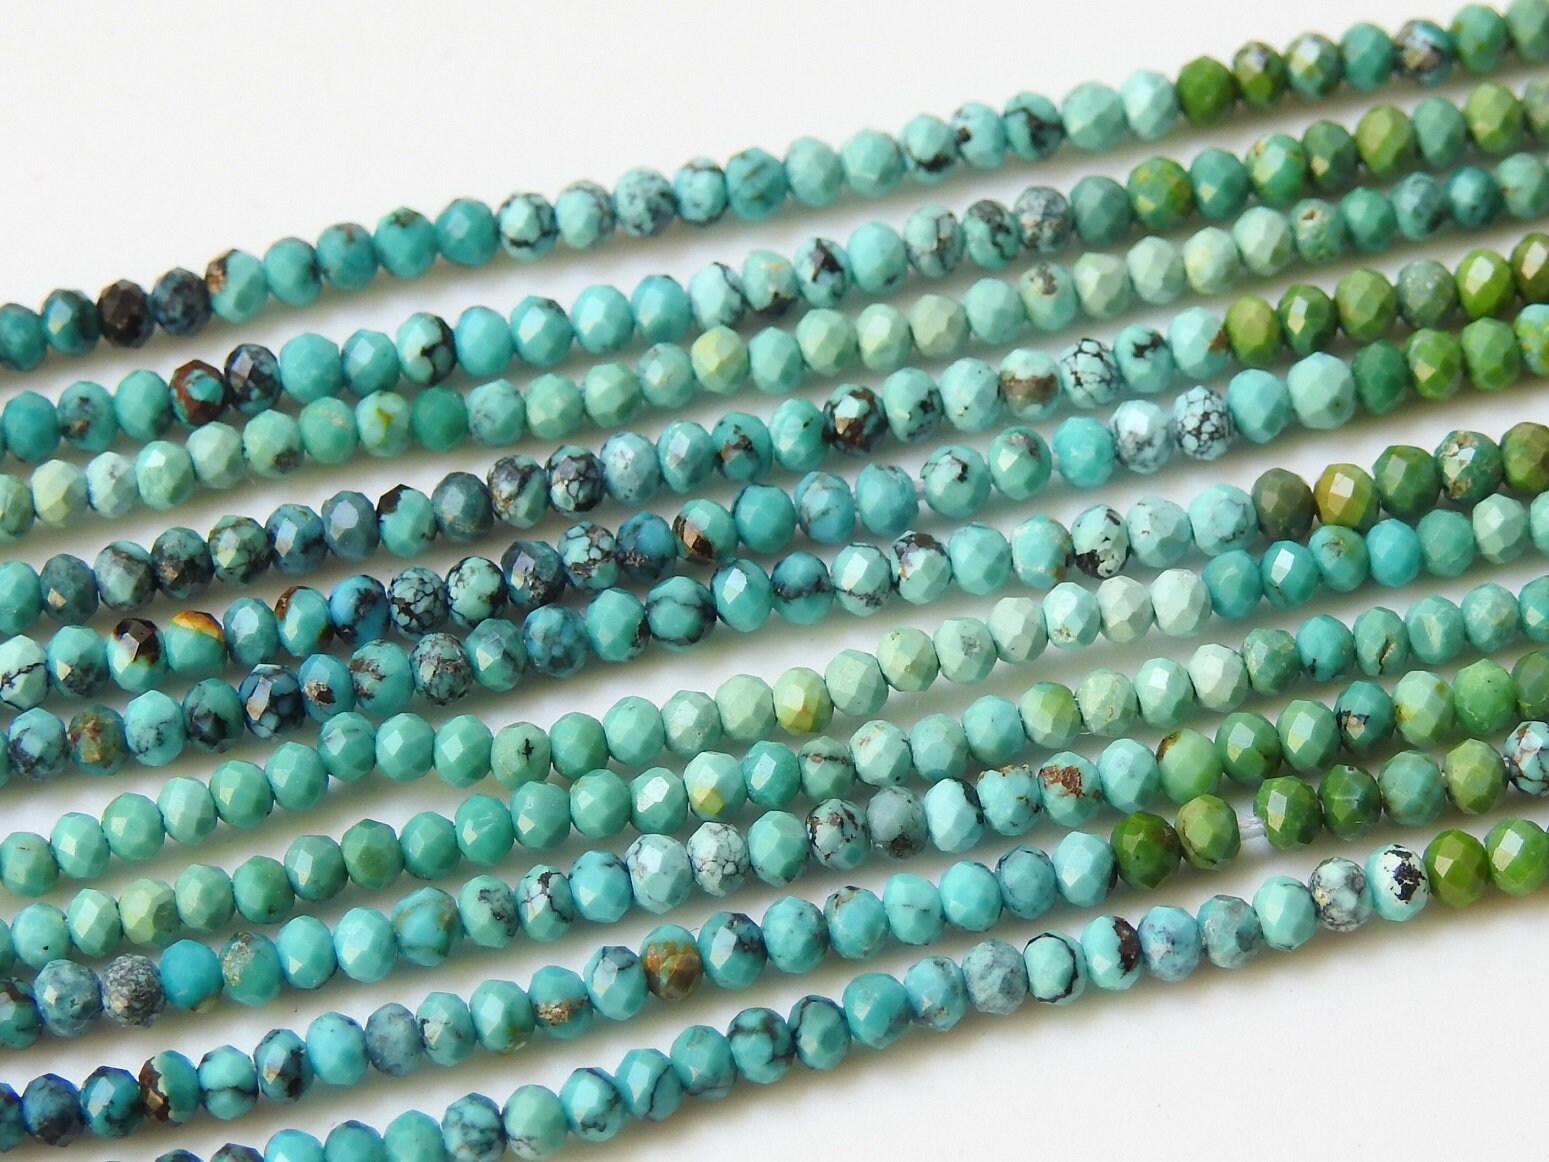 Arizona Turquoise Micro Faceted Roundel Beads,Multi Shaded,Loose Stone,Wholesaler,Supplies,13Inch 2MM Approx,100%Natural PME-B2 | Save 33% - Rajasthan Living 13